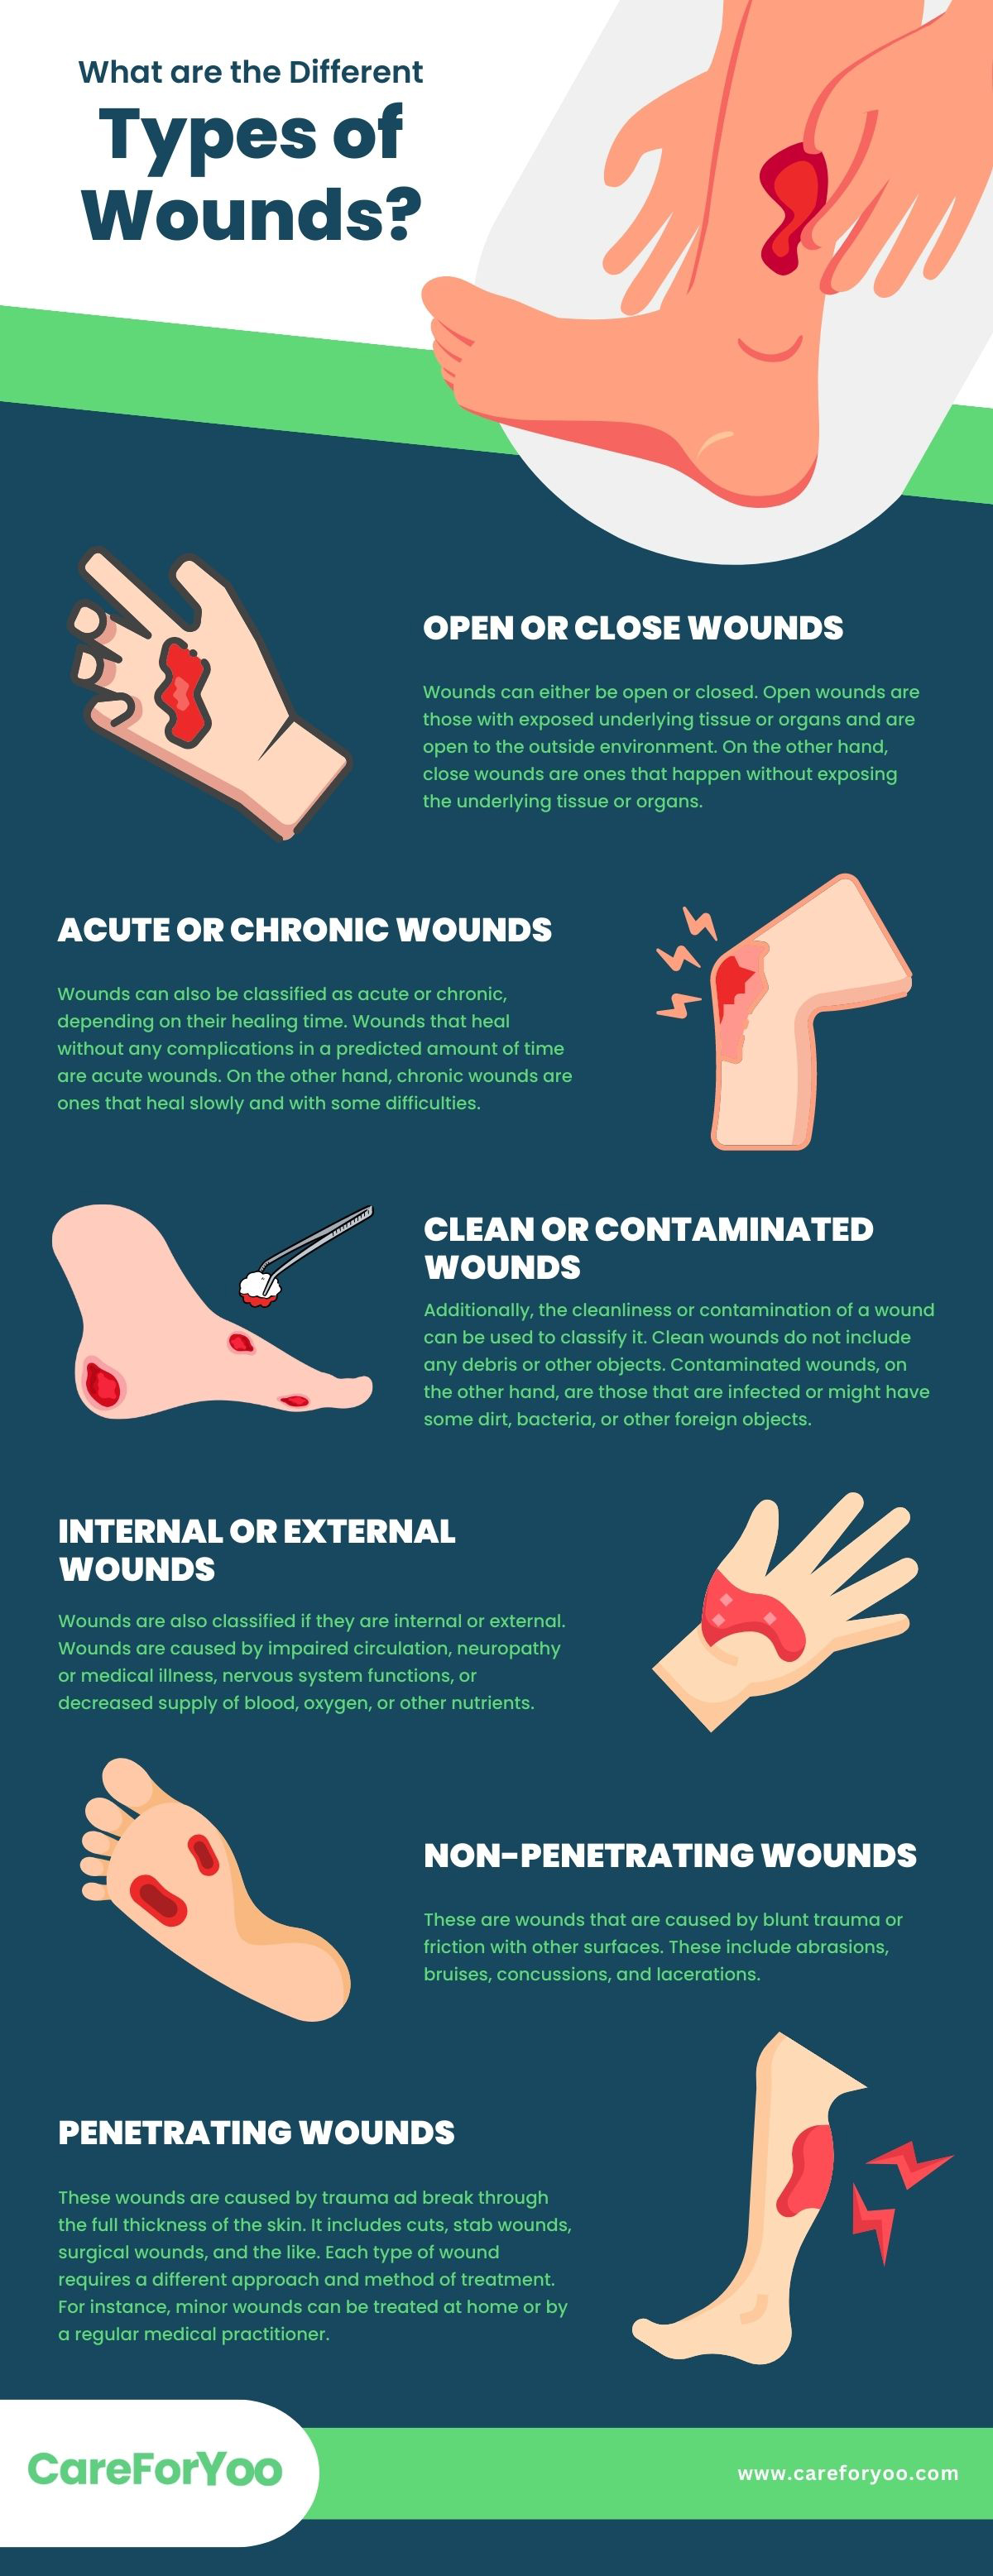 What are the Different Types of Wounds